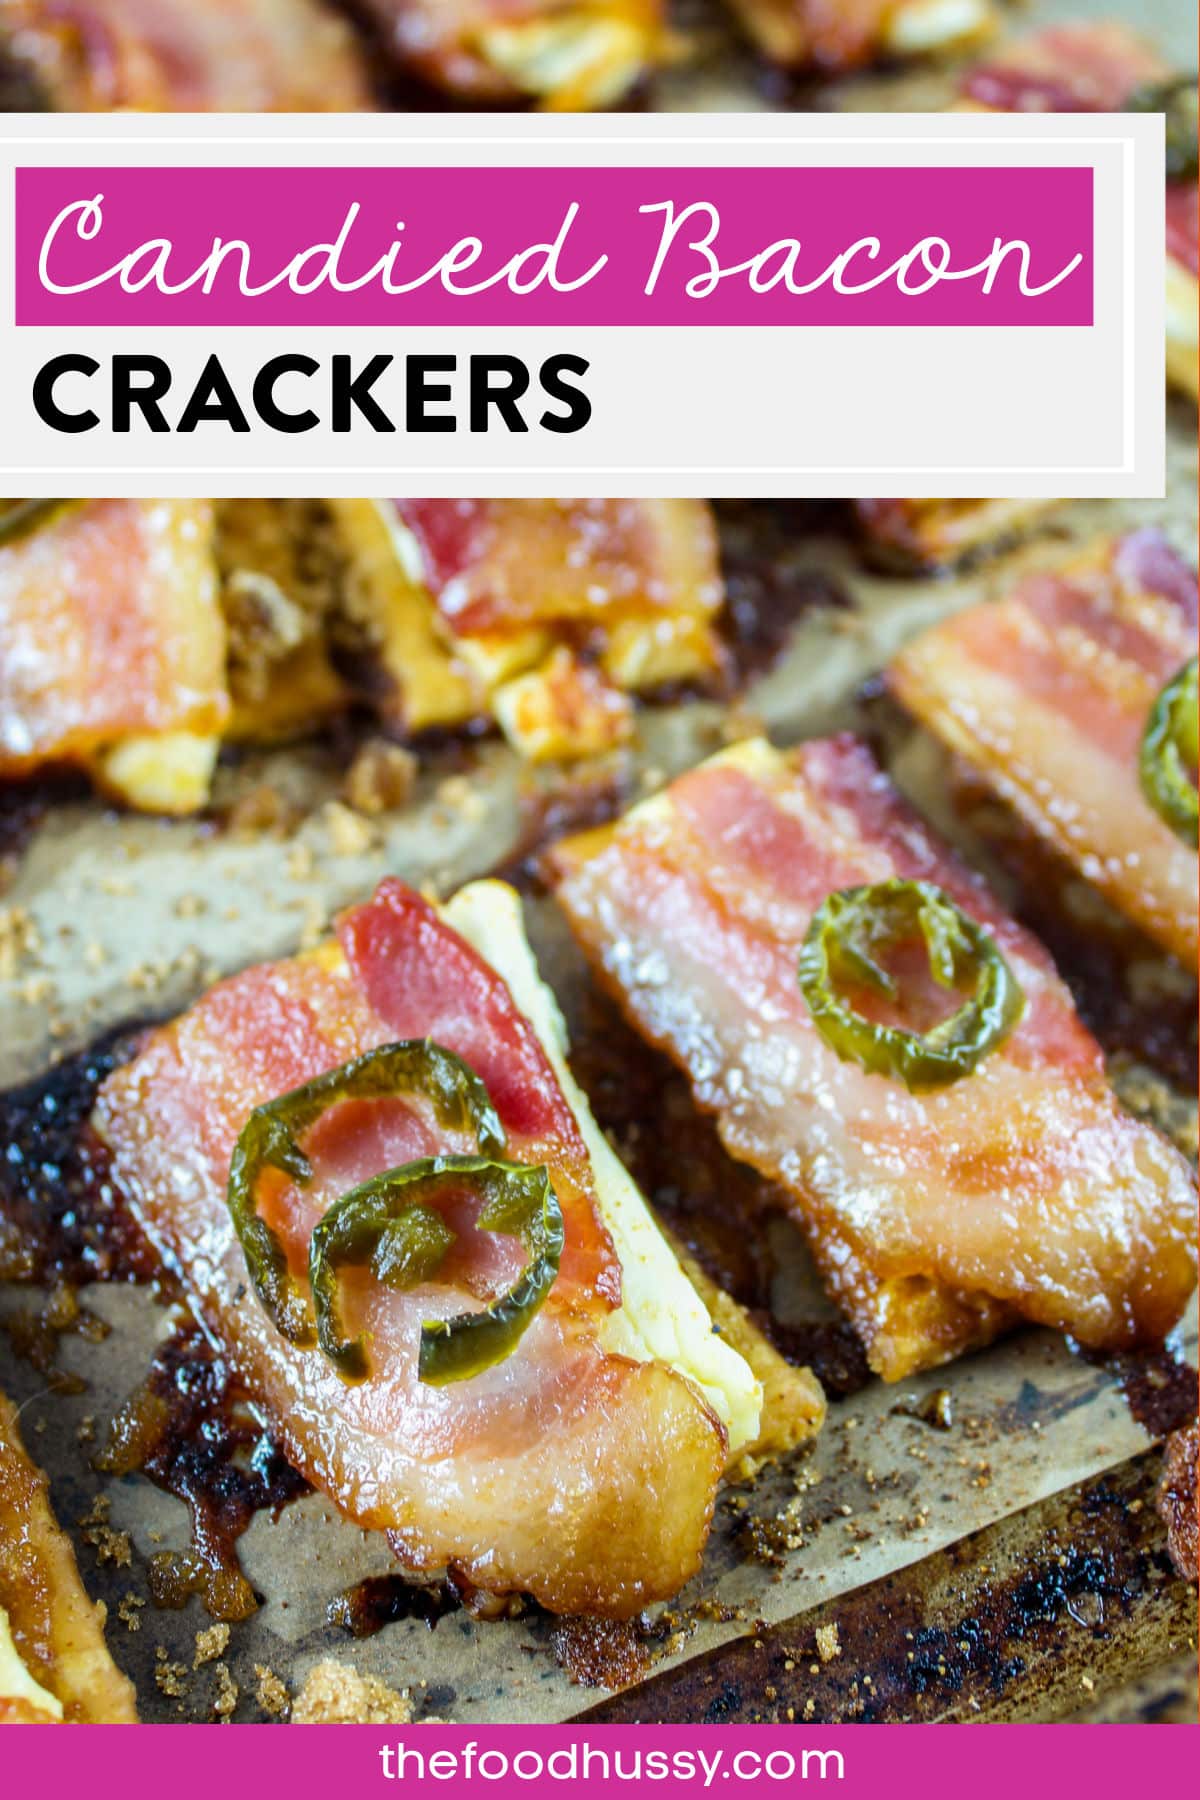 These Candied Bacon Crackers are a delicious appetizer for holidays, game days or any party! Crackers layered with cream cheese, thick cut bacon, bbq seasoning and brown sugar for the perfect bite of savory & sweet snack! via @foodhussy